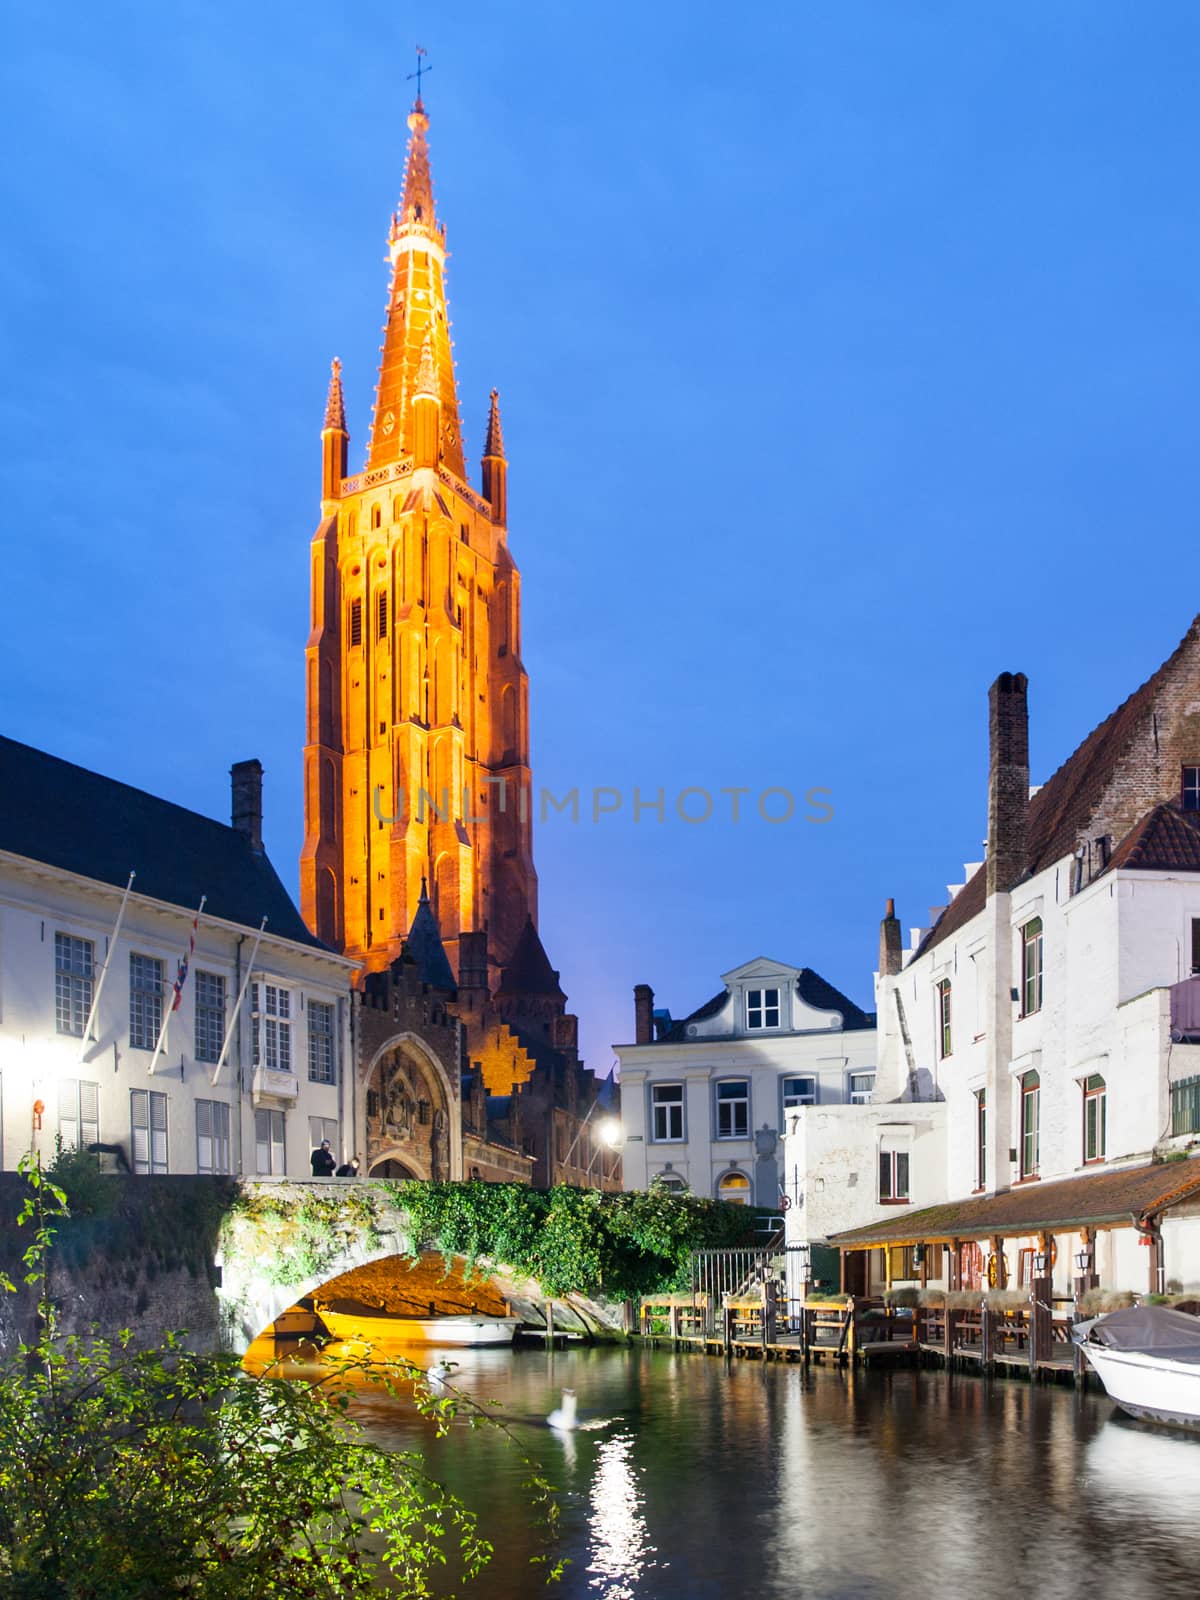 Church of Our Lady and bridge over water canal by night, Bruges, Belgium by pyty